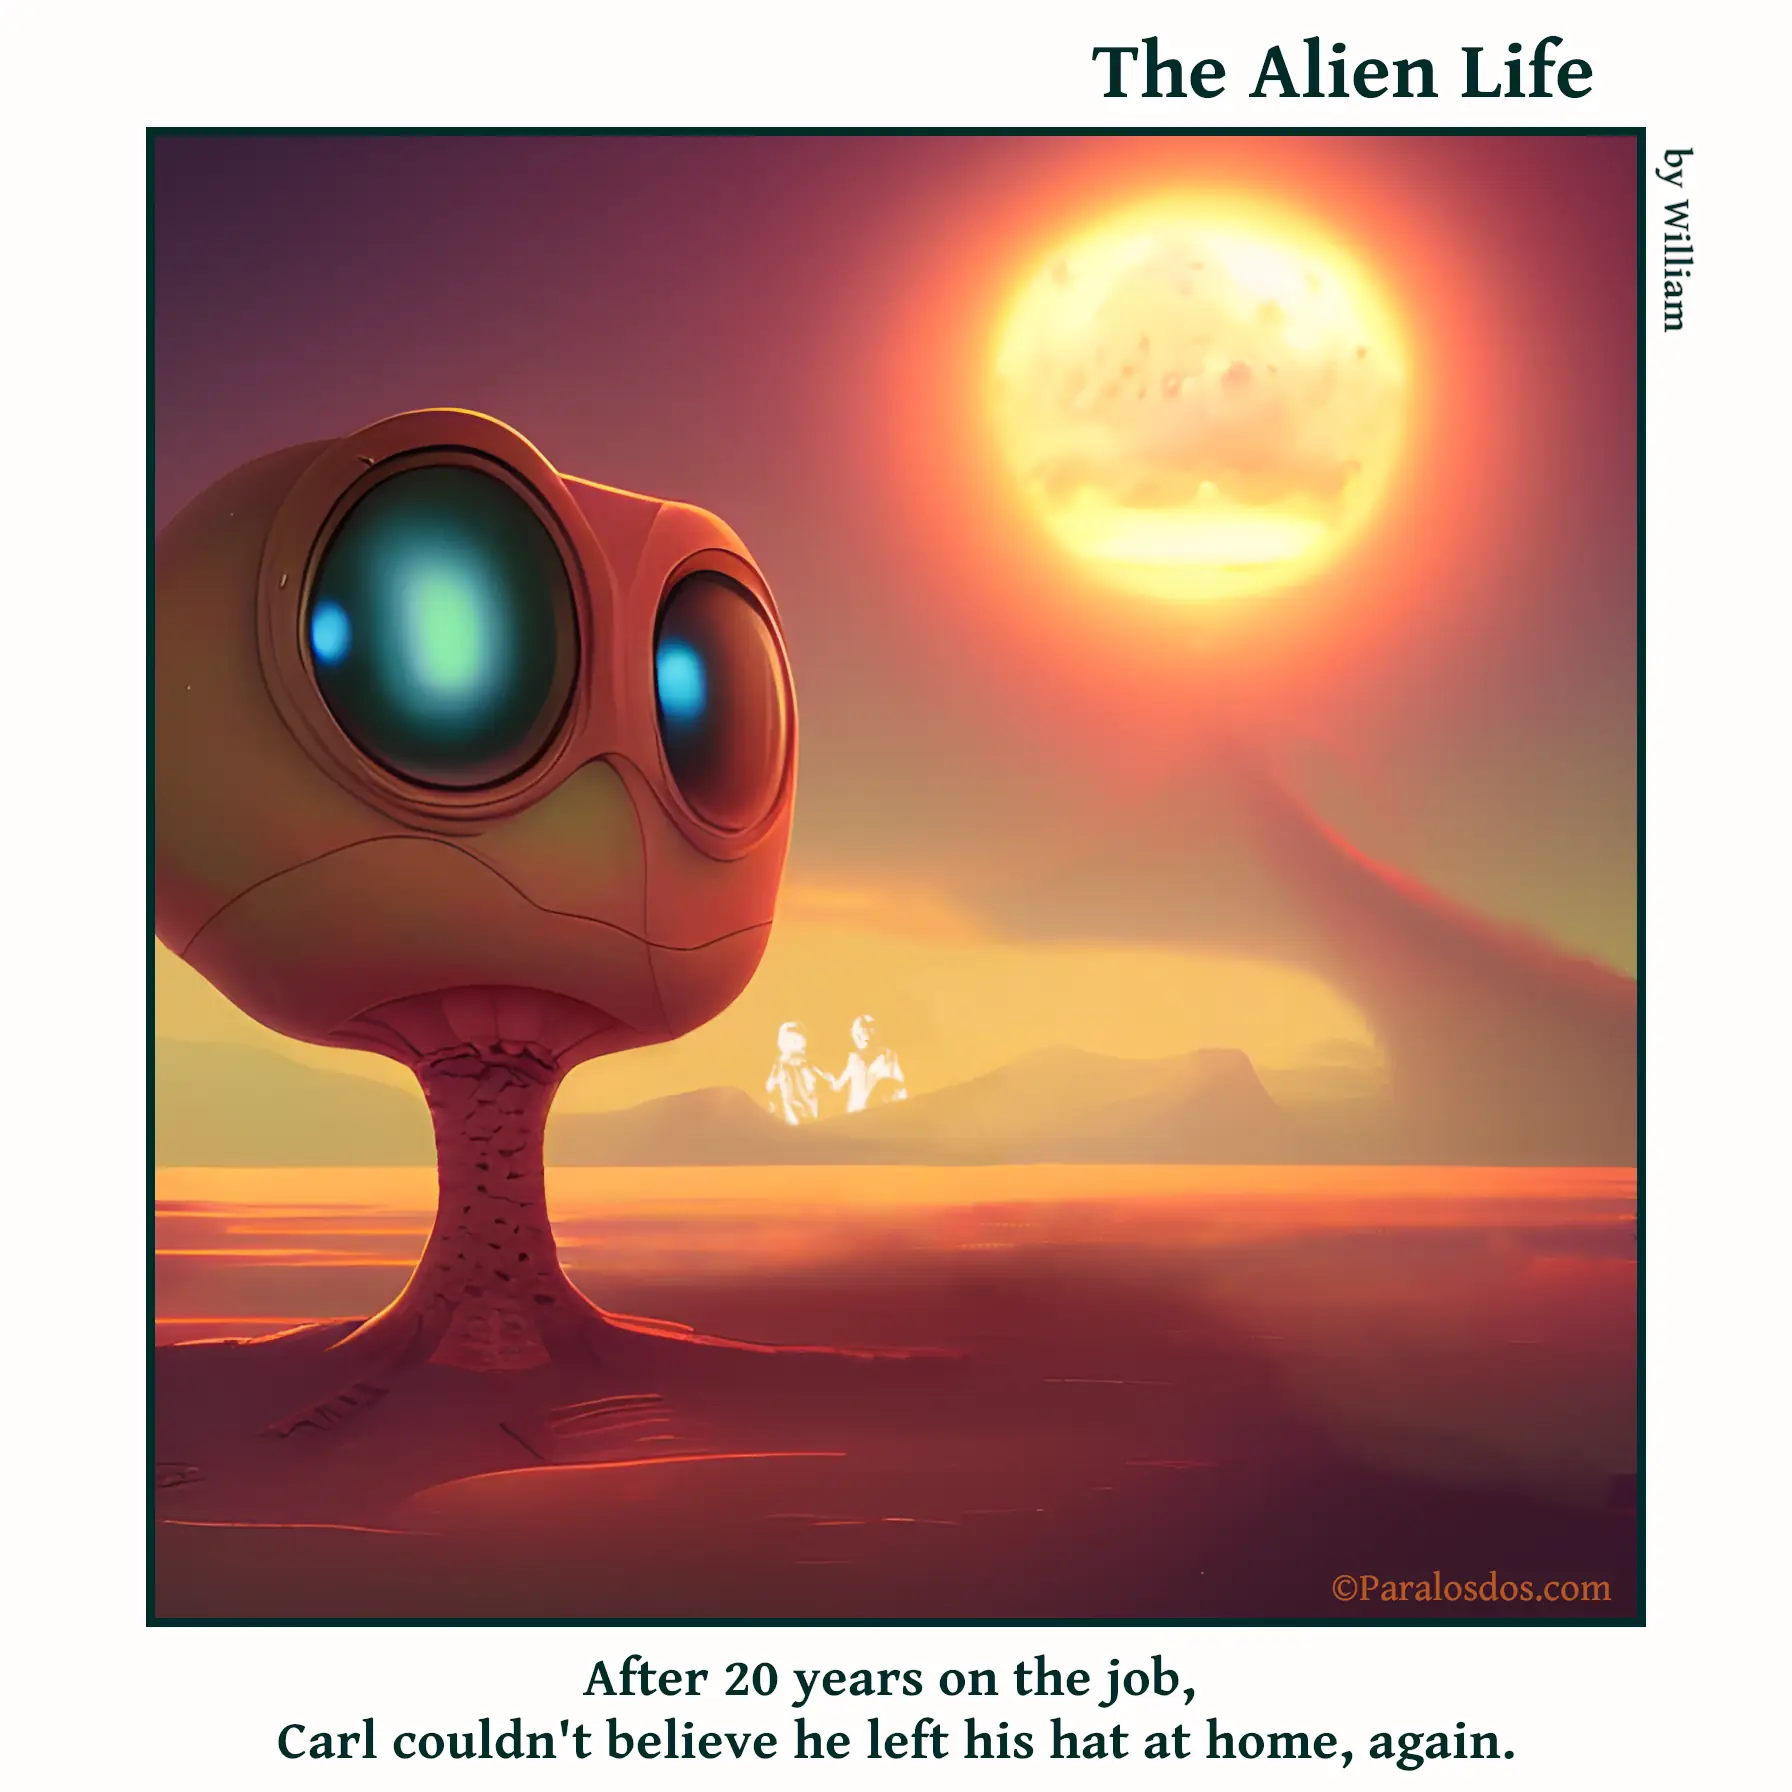 The Alien Life, one panel Comic. An alien, who appears to be a giant head on a long thin neck, is stationed in a desert under a scorching sun. The caption reads: After 20 years on the job, Carl couldn't believe he left his hat at home, again.